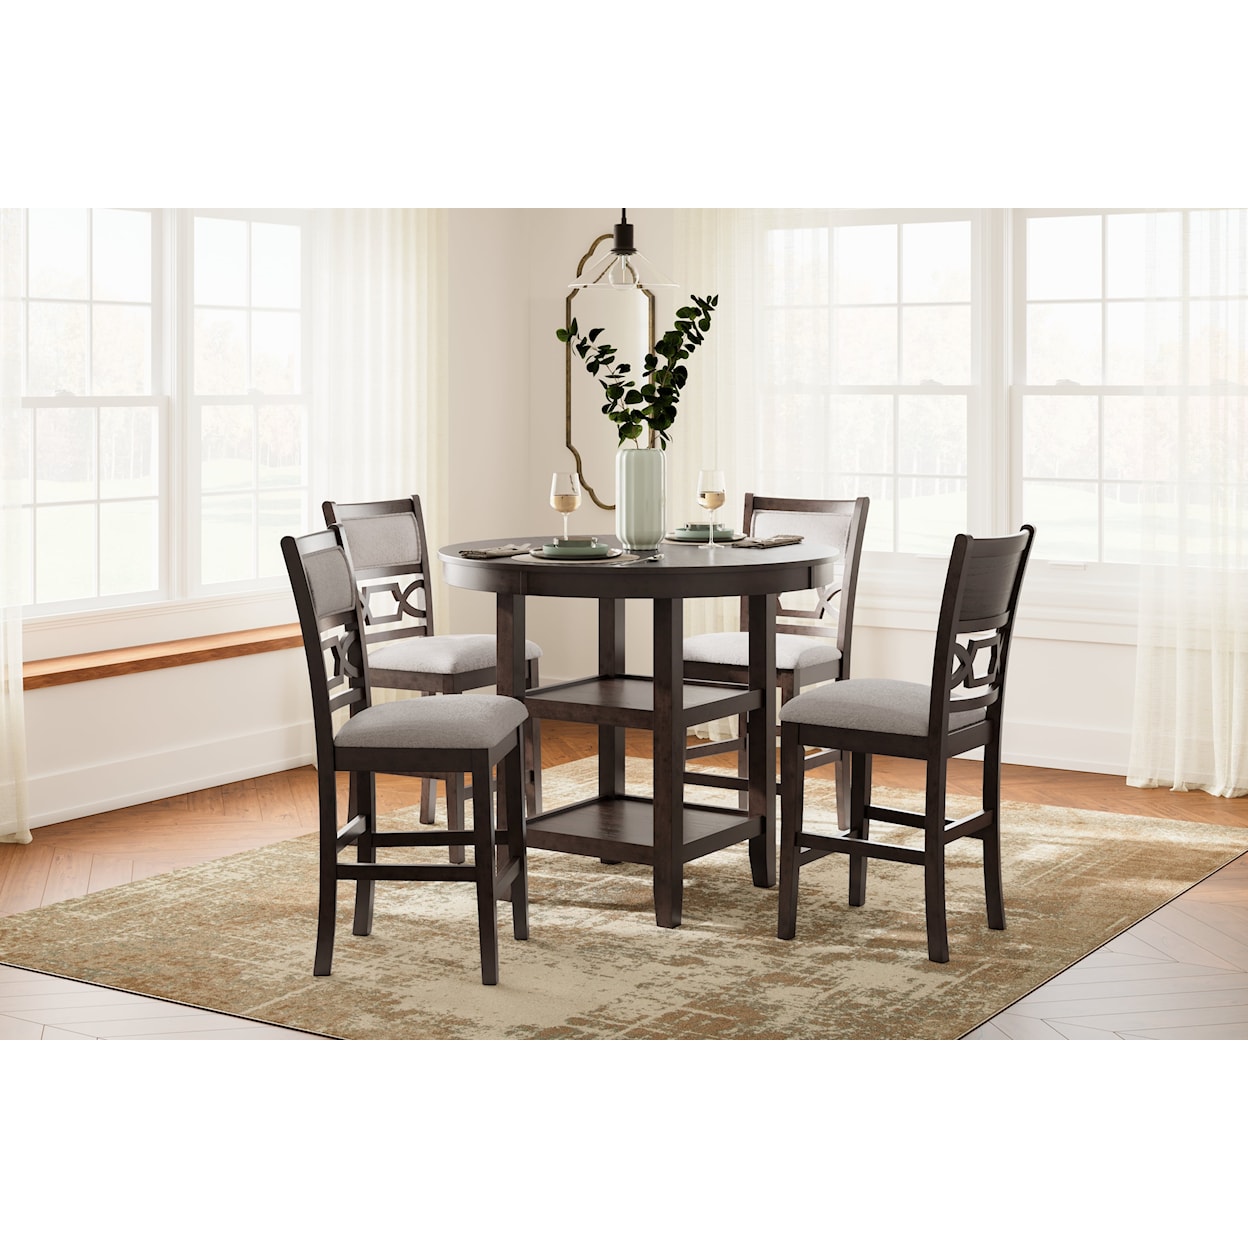 Benchcraft Langwest Counter Table Set